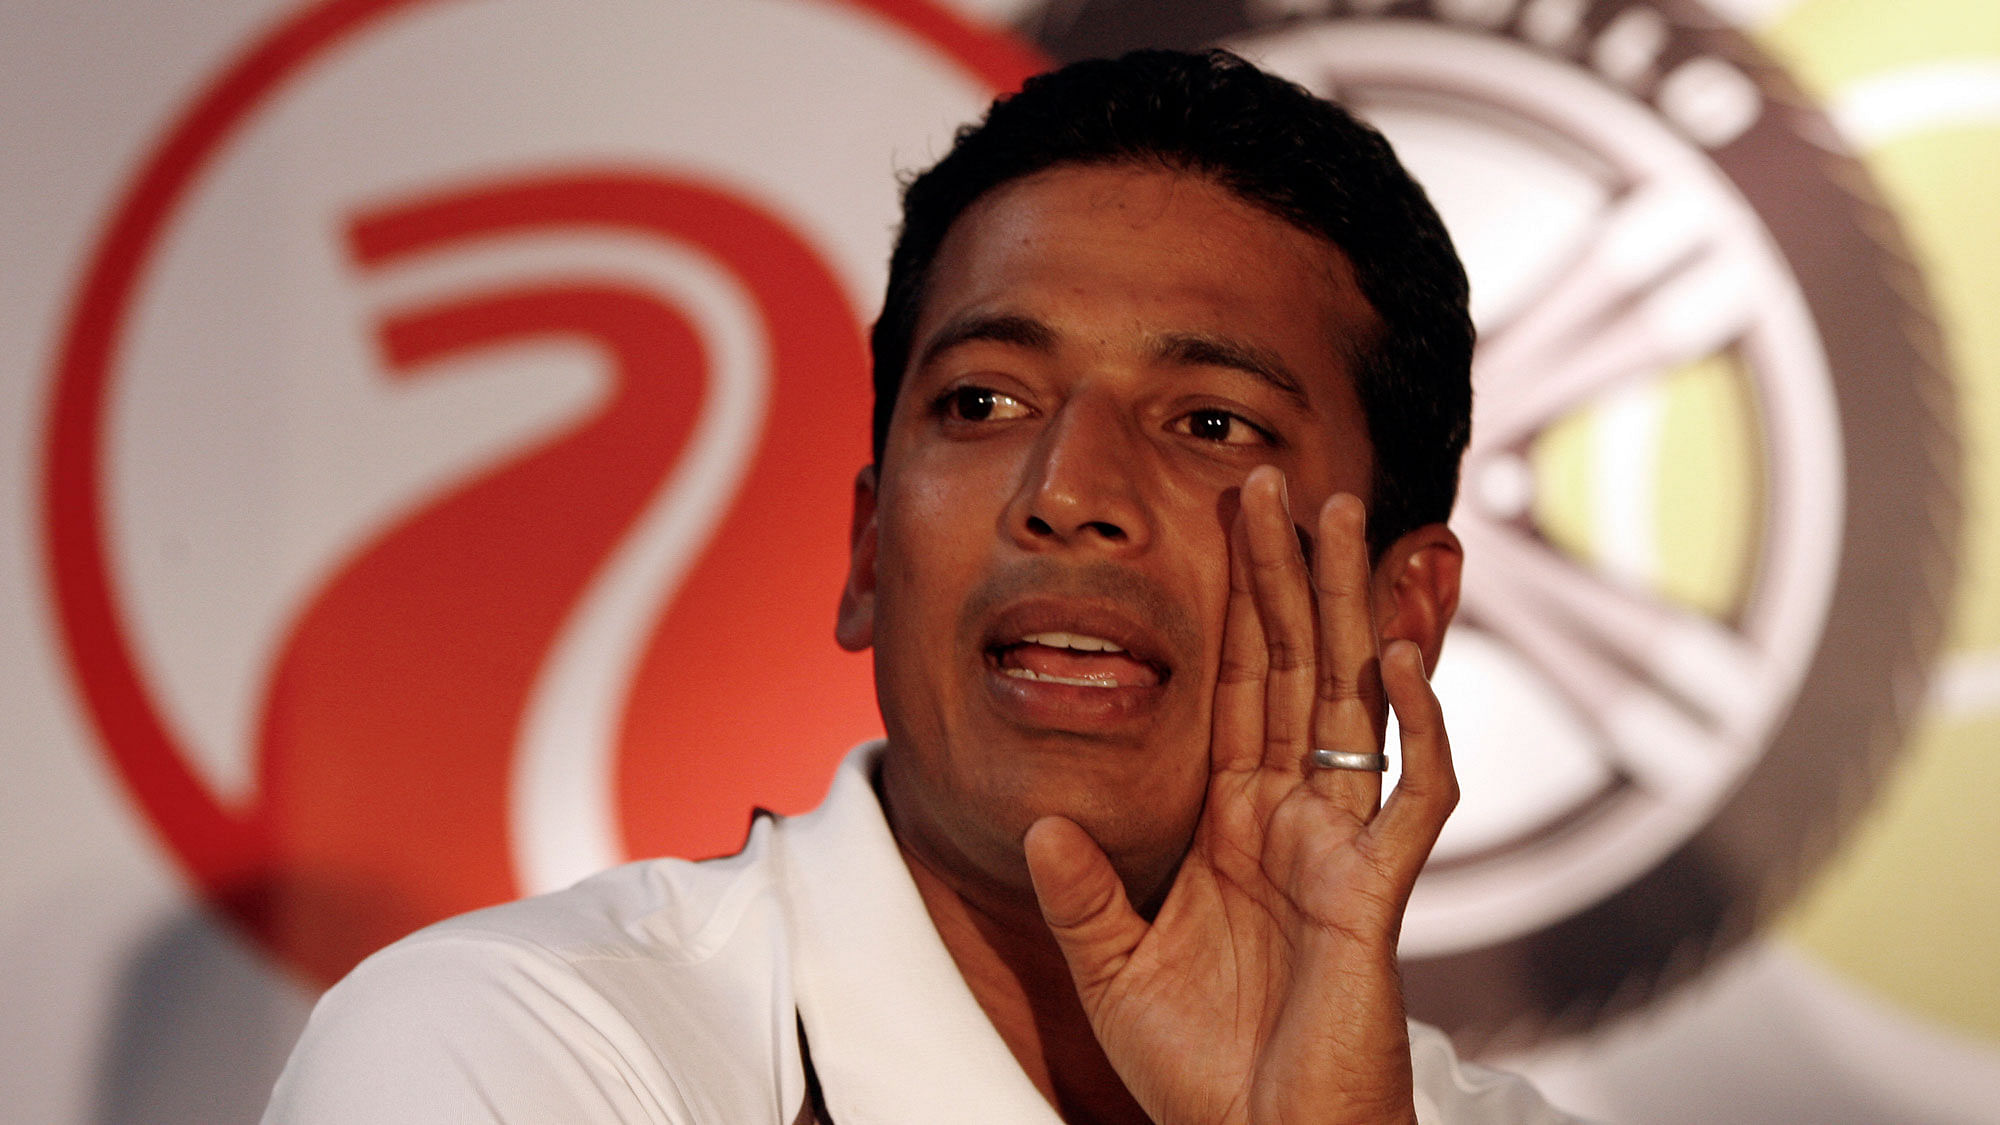 India’s former Davis Cup skipper Mahesh Bhupathi said he cannot get over the “hurt” caused by the national federation’s manner of sacking him.